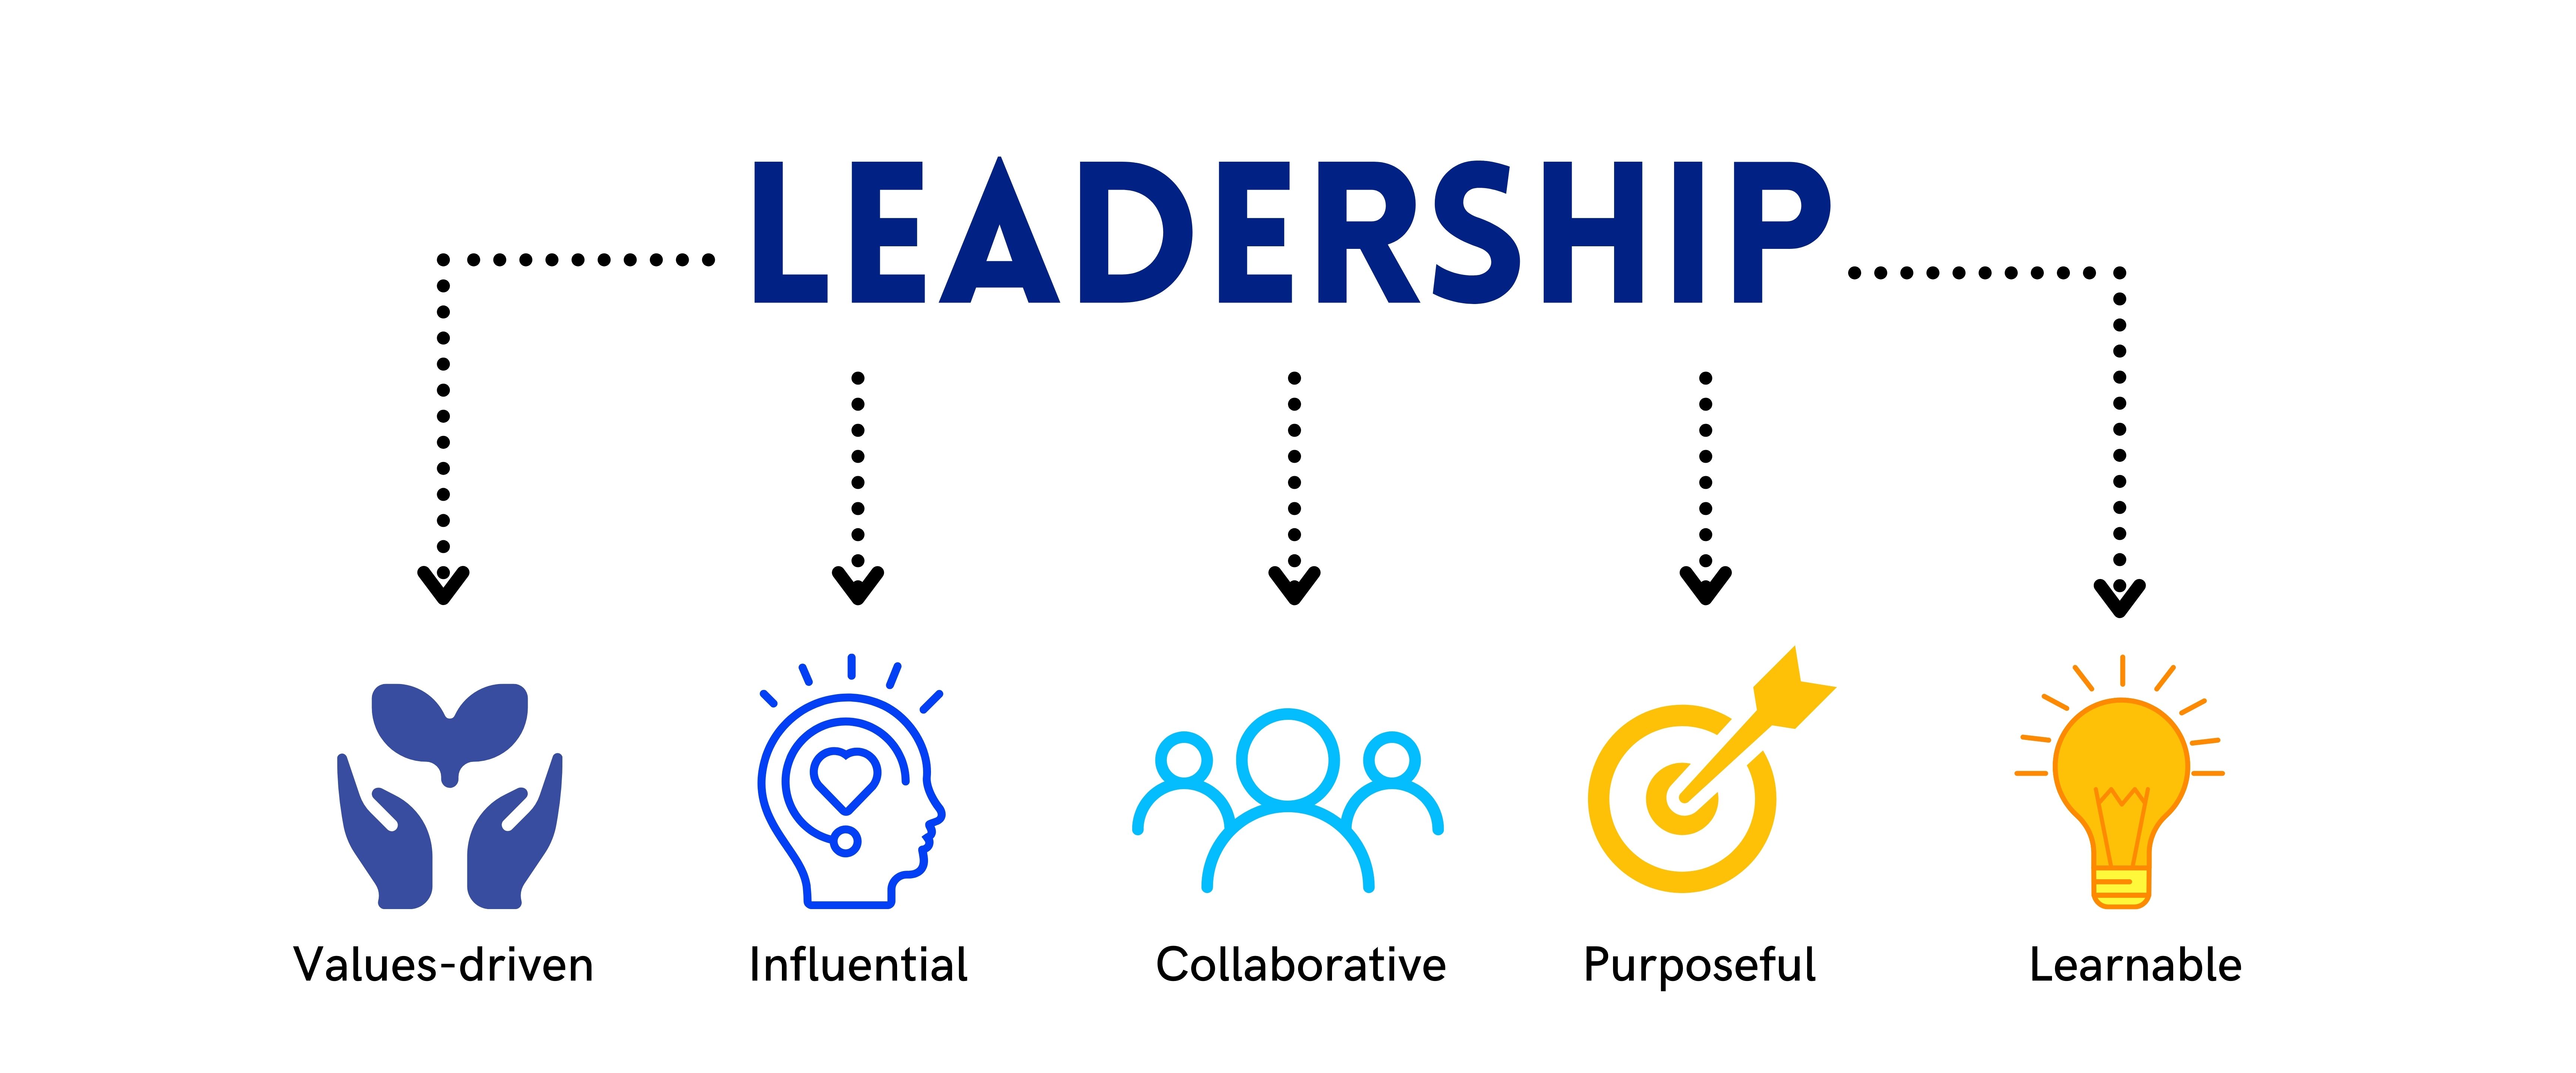 Leadership framework: Values-driven, influential, collaborative, purposeful, learnable